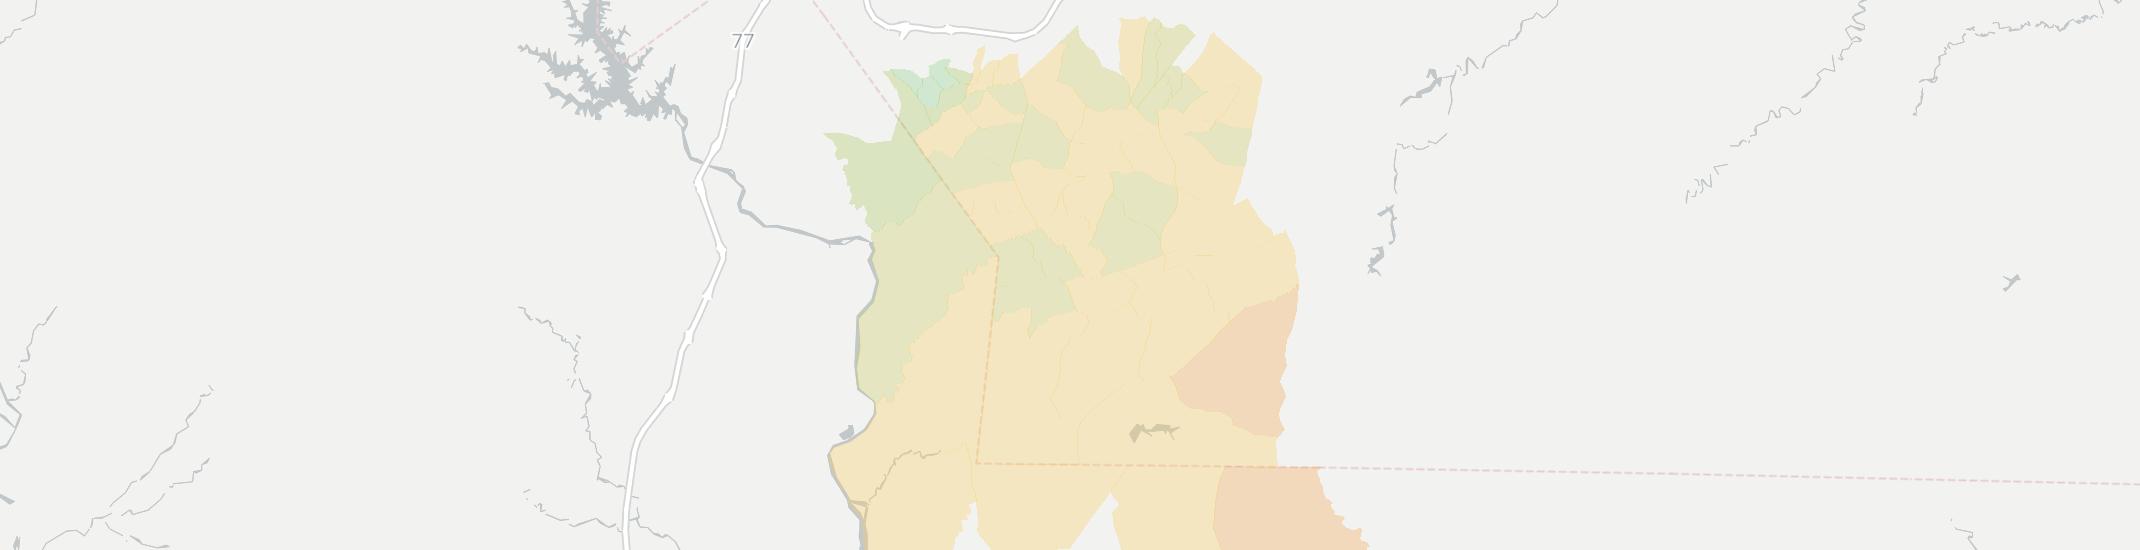 Waxhaw Internet Competition Map. Click for interactive map.